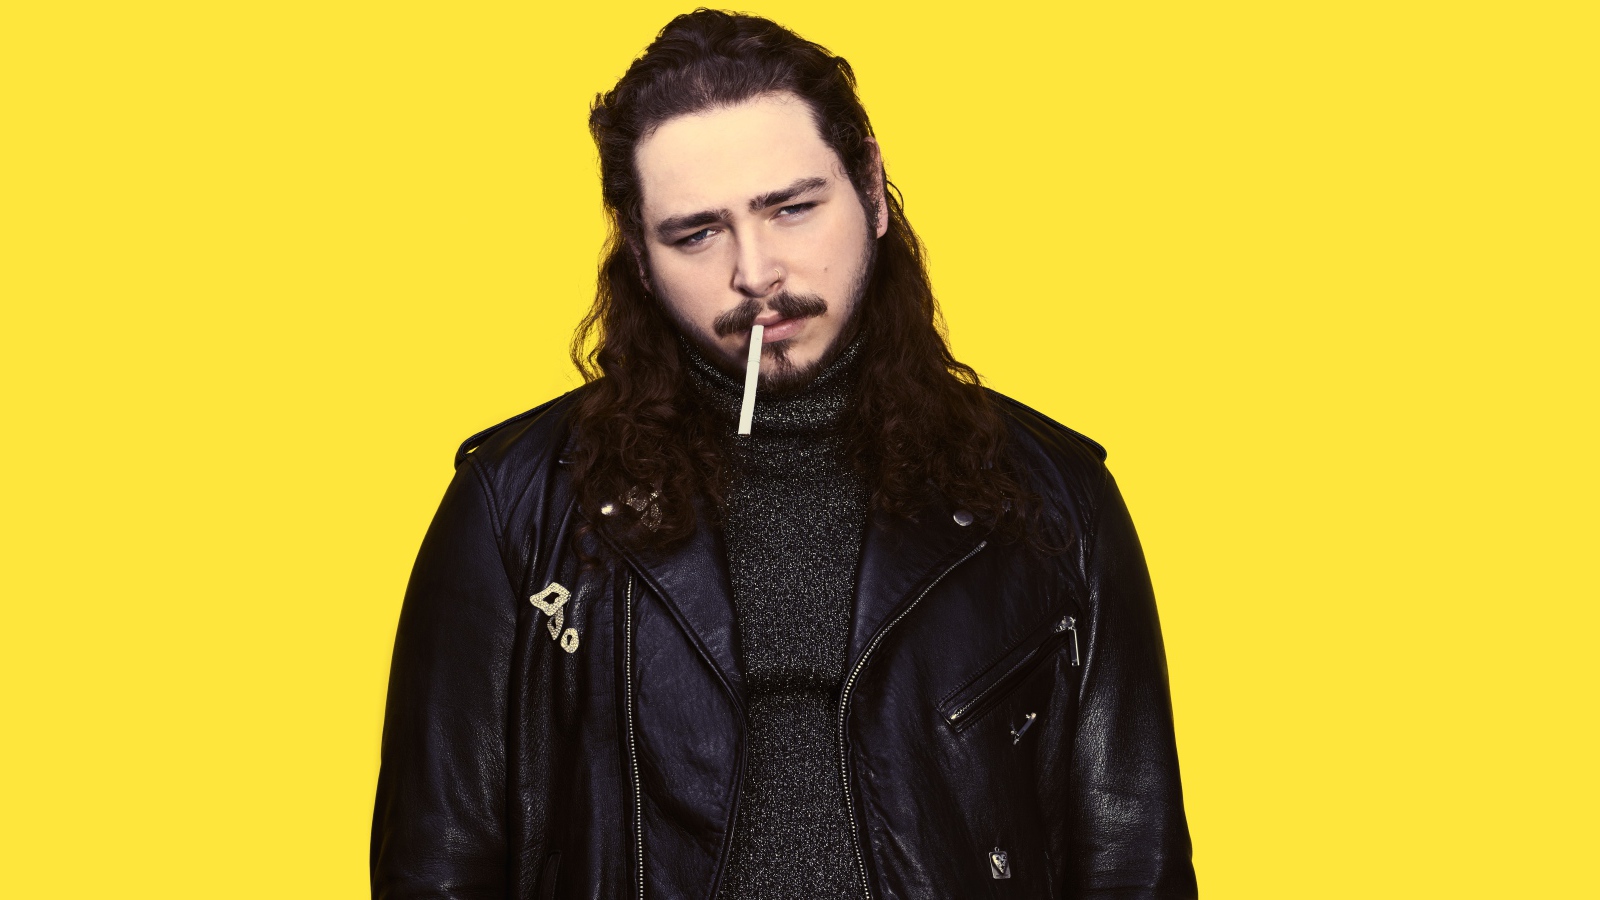 American rapper Post Malone in a black jacket on a yellow background